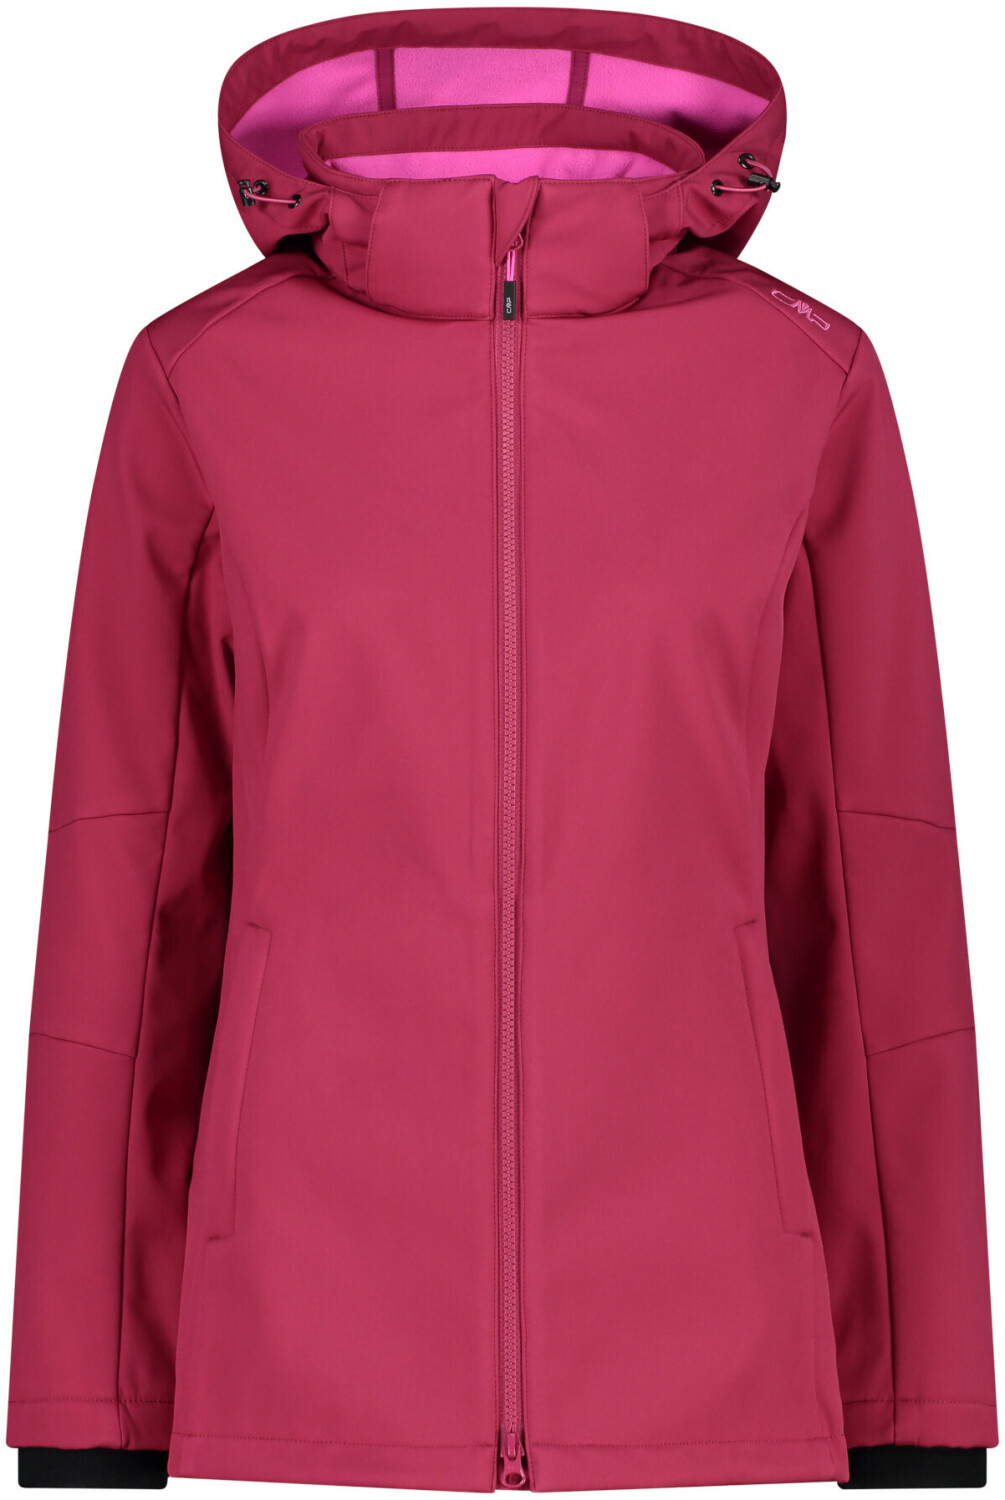 Preisvergleich Fit (3A22226) ab sangria 47,00 Comfortable Woman | bei € With CMP Softshell Long Jacket